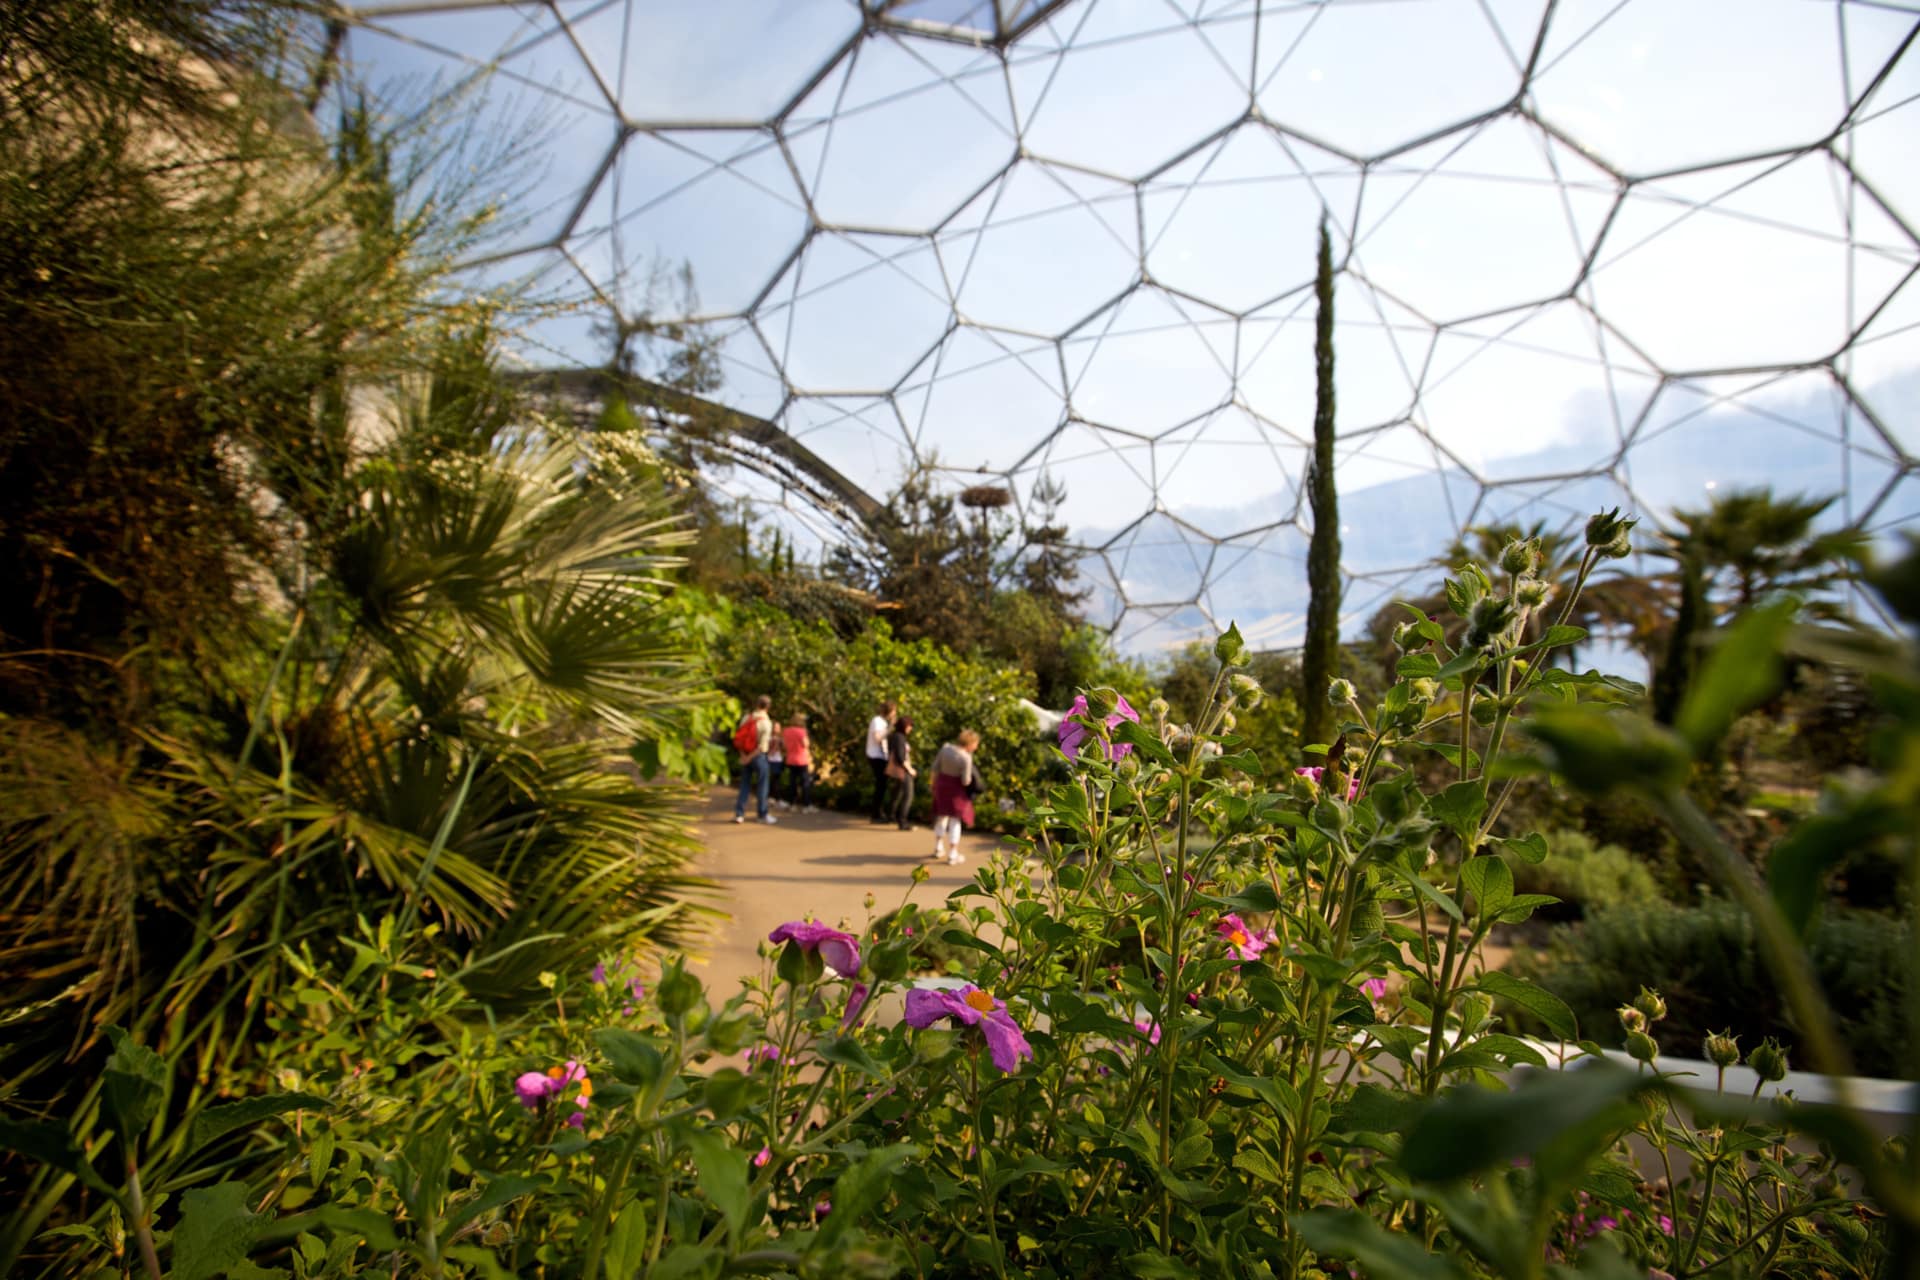 The Eden Project, located in Cornwall UK, is a one-of-a-kind project that set the tone for the next generation of sustainable botanical and zoo projects.